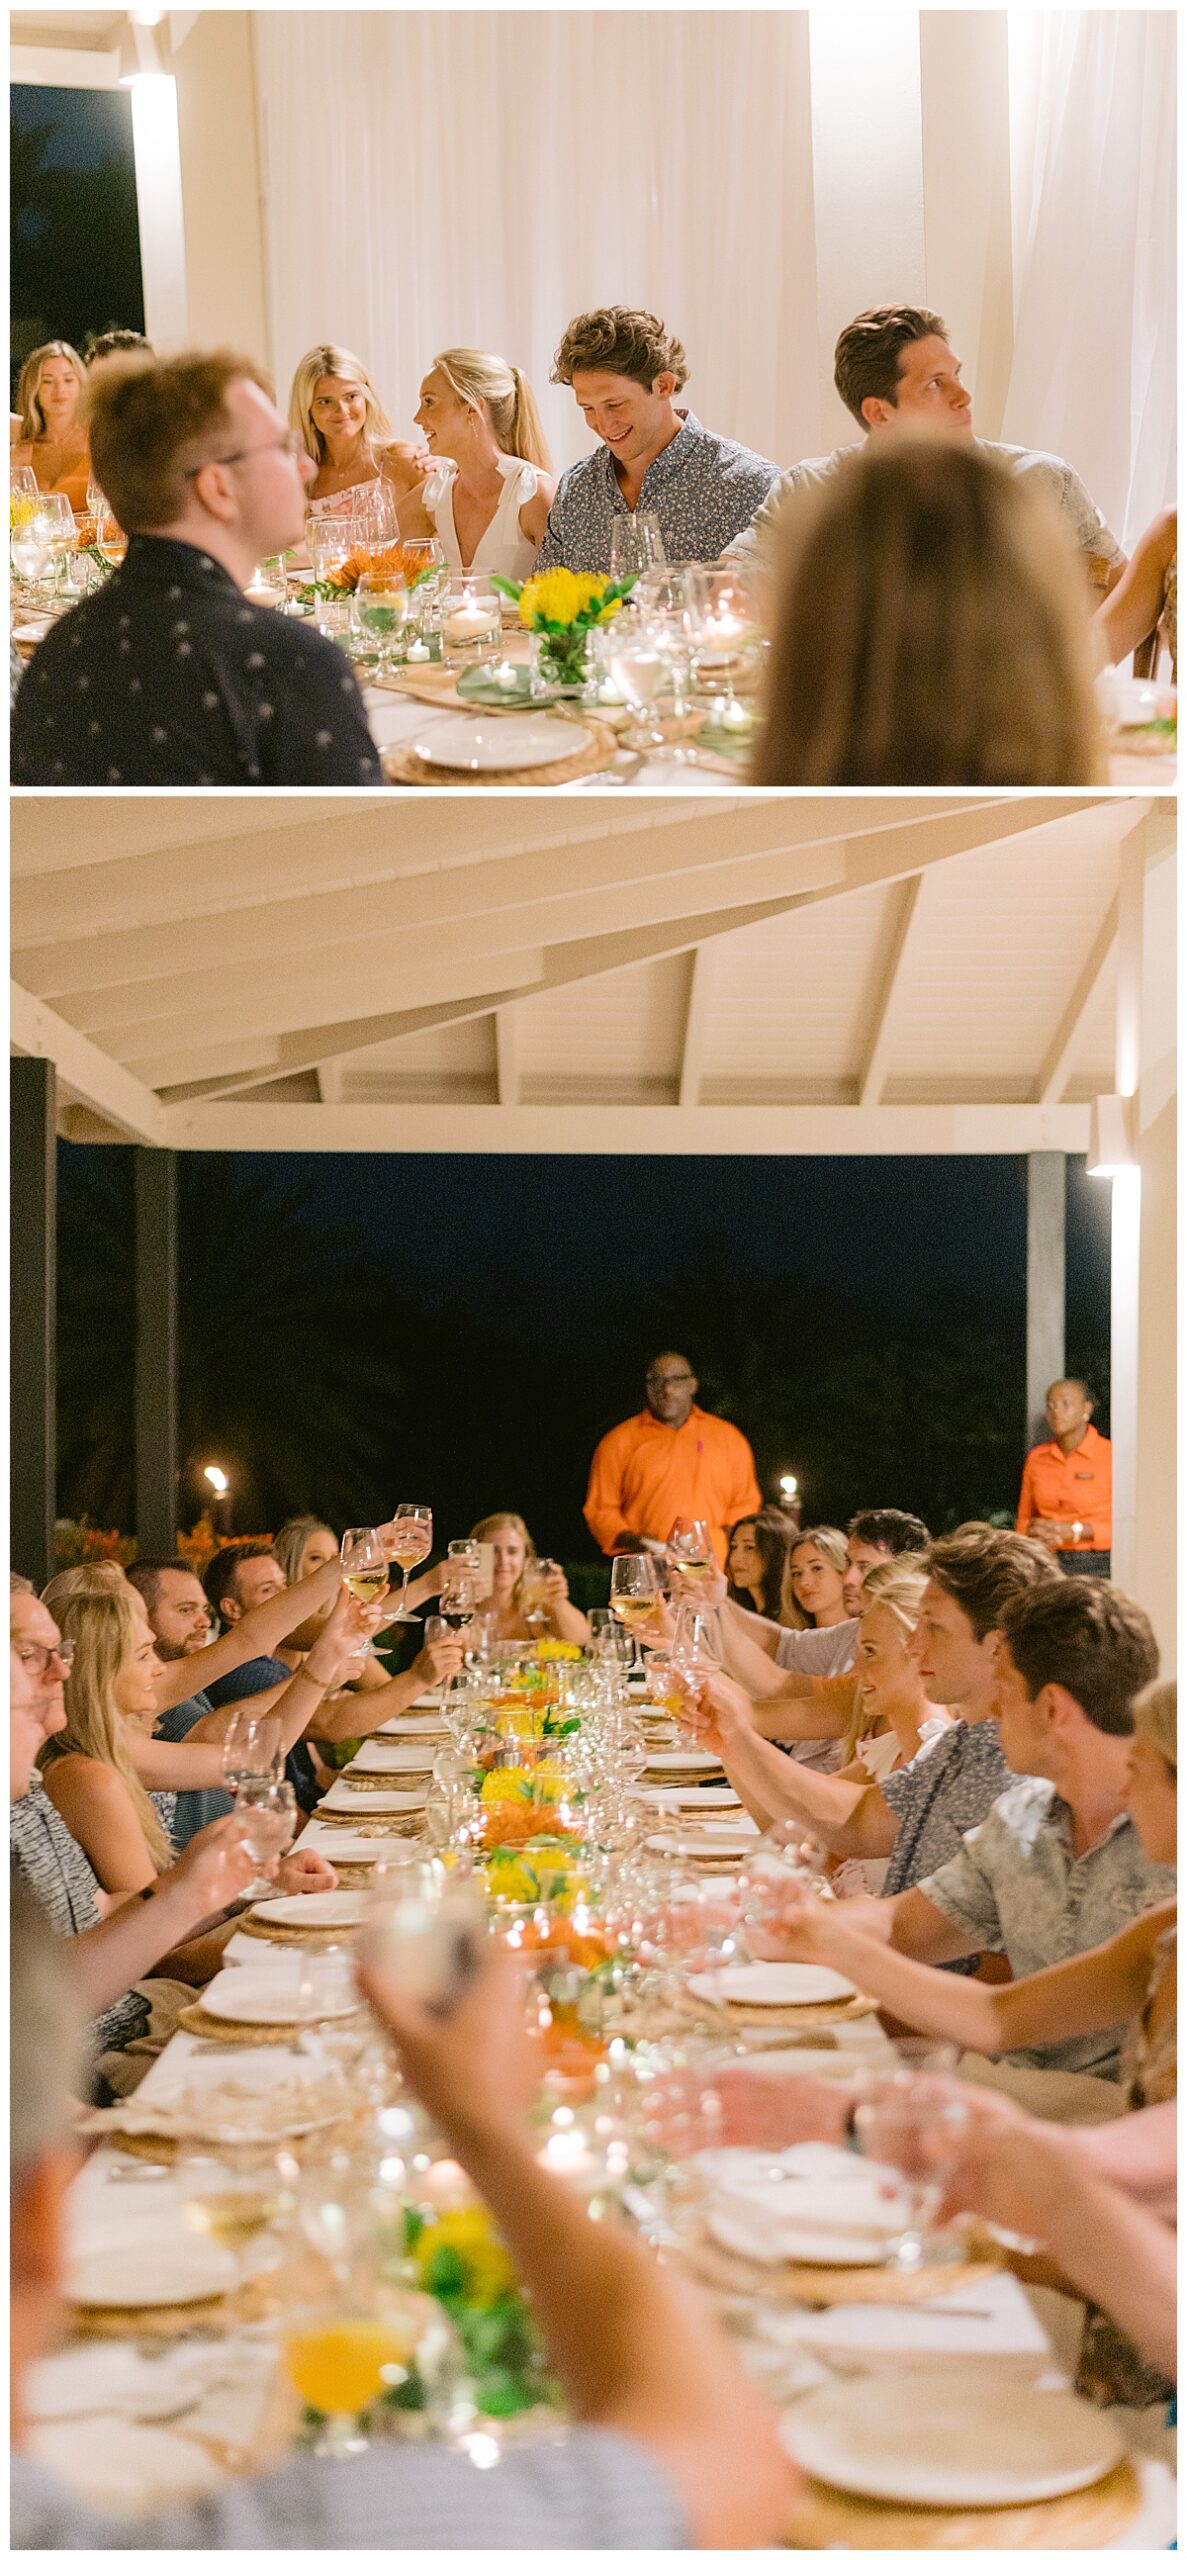 As the final celebration before your big day, your wedding rehearsal dinner is a special and intimate occasion that deserves to be captured in all its glory. At Jumby Bay Antigua, we offer professional photography services to ensure that every moment of your rehearsal dinner is captured and preserved for years to come.

Our team of experienced photographers has a keen eye for detail and a talent for capturing candid, natural-looking shots that perfectly capture the mood and atmosphere of the evening. From the happy smiles and laughter of your guests to the beautiful setting of Jumby Bay, we will ensure that every moment is captured in stunning clarity and resolution.

In addition to our exceptional photography services, we also offer a range of options for customizing your rehearsal dinner coverage. Whether you want a full-day coverage or a more intimate session, we have the experience and expertise to create a package that meets your specific needs and preferences.

So why wait? Contact us today to learn more about our rehearsal dinner coverage options and let us help you create beautiful and lasting memories of your special occasion.